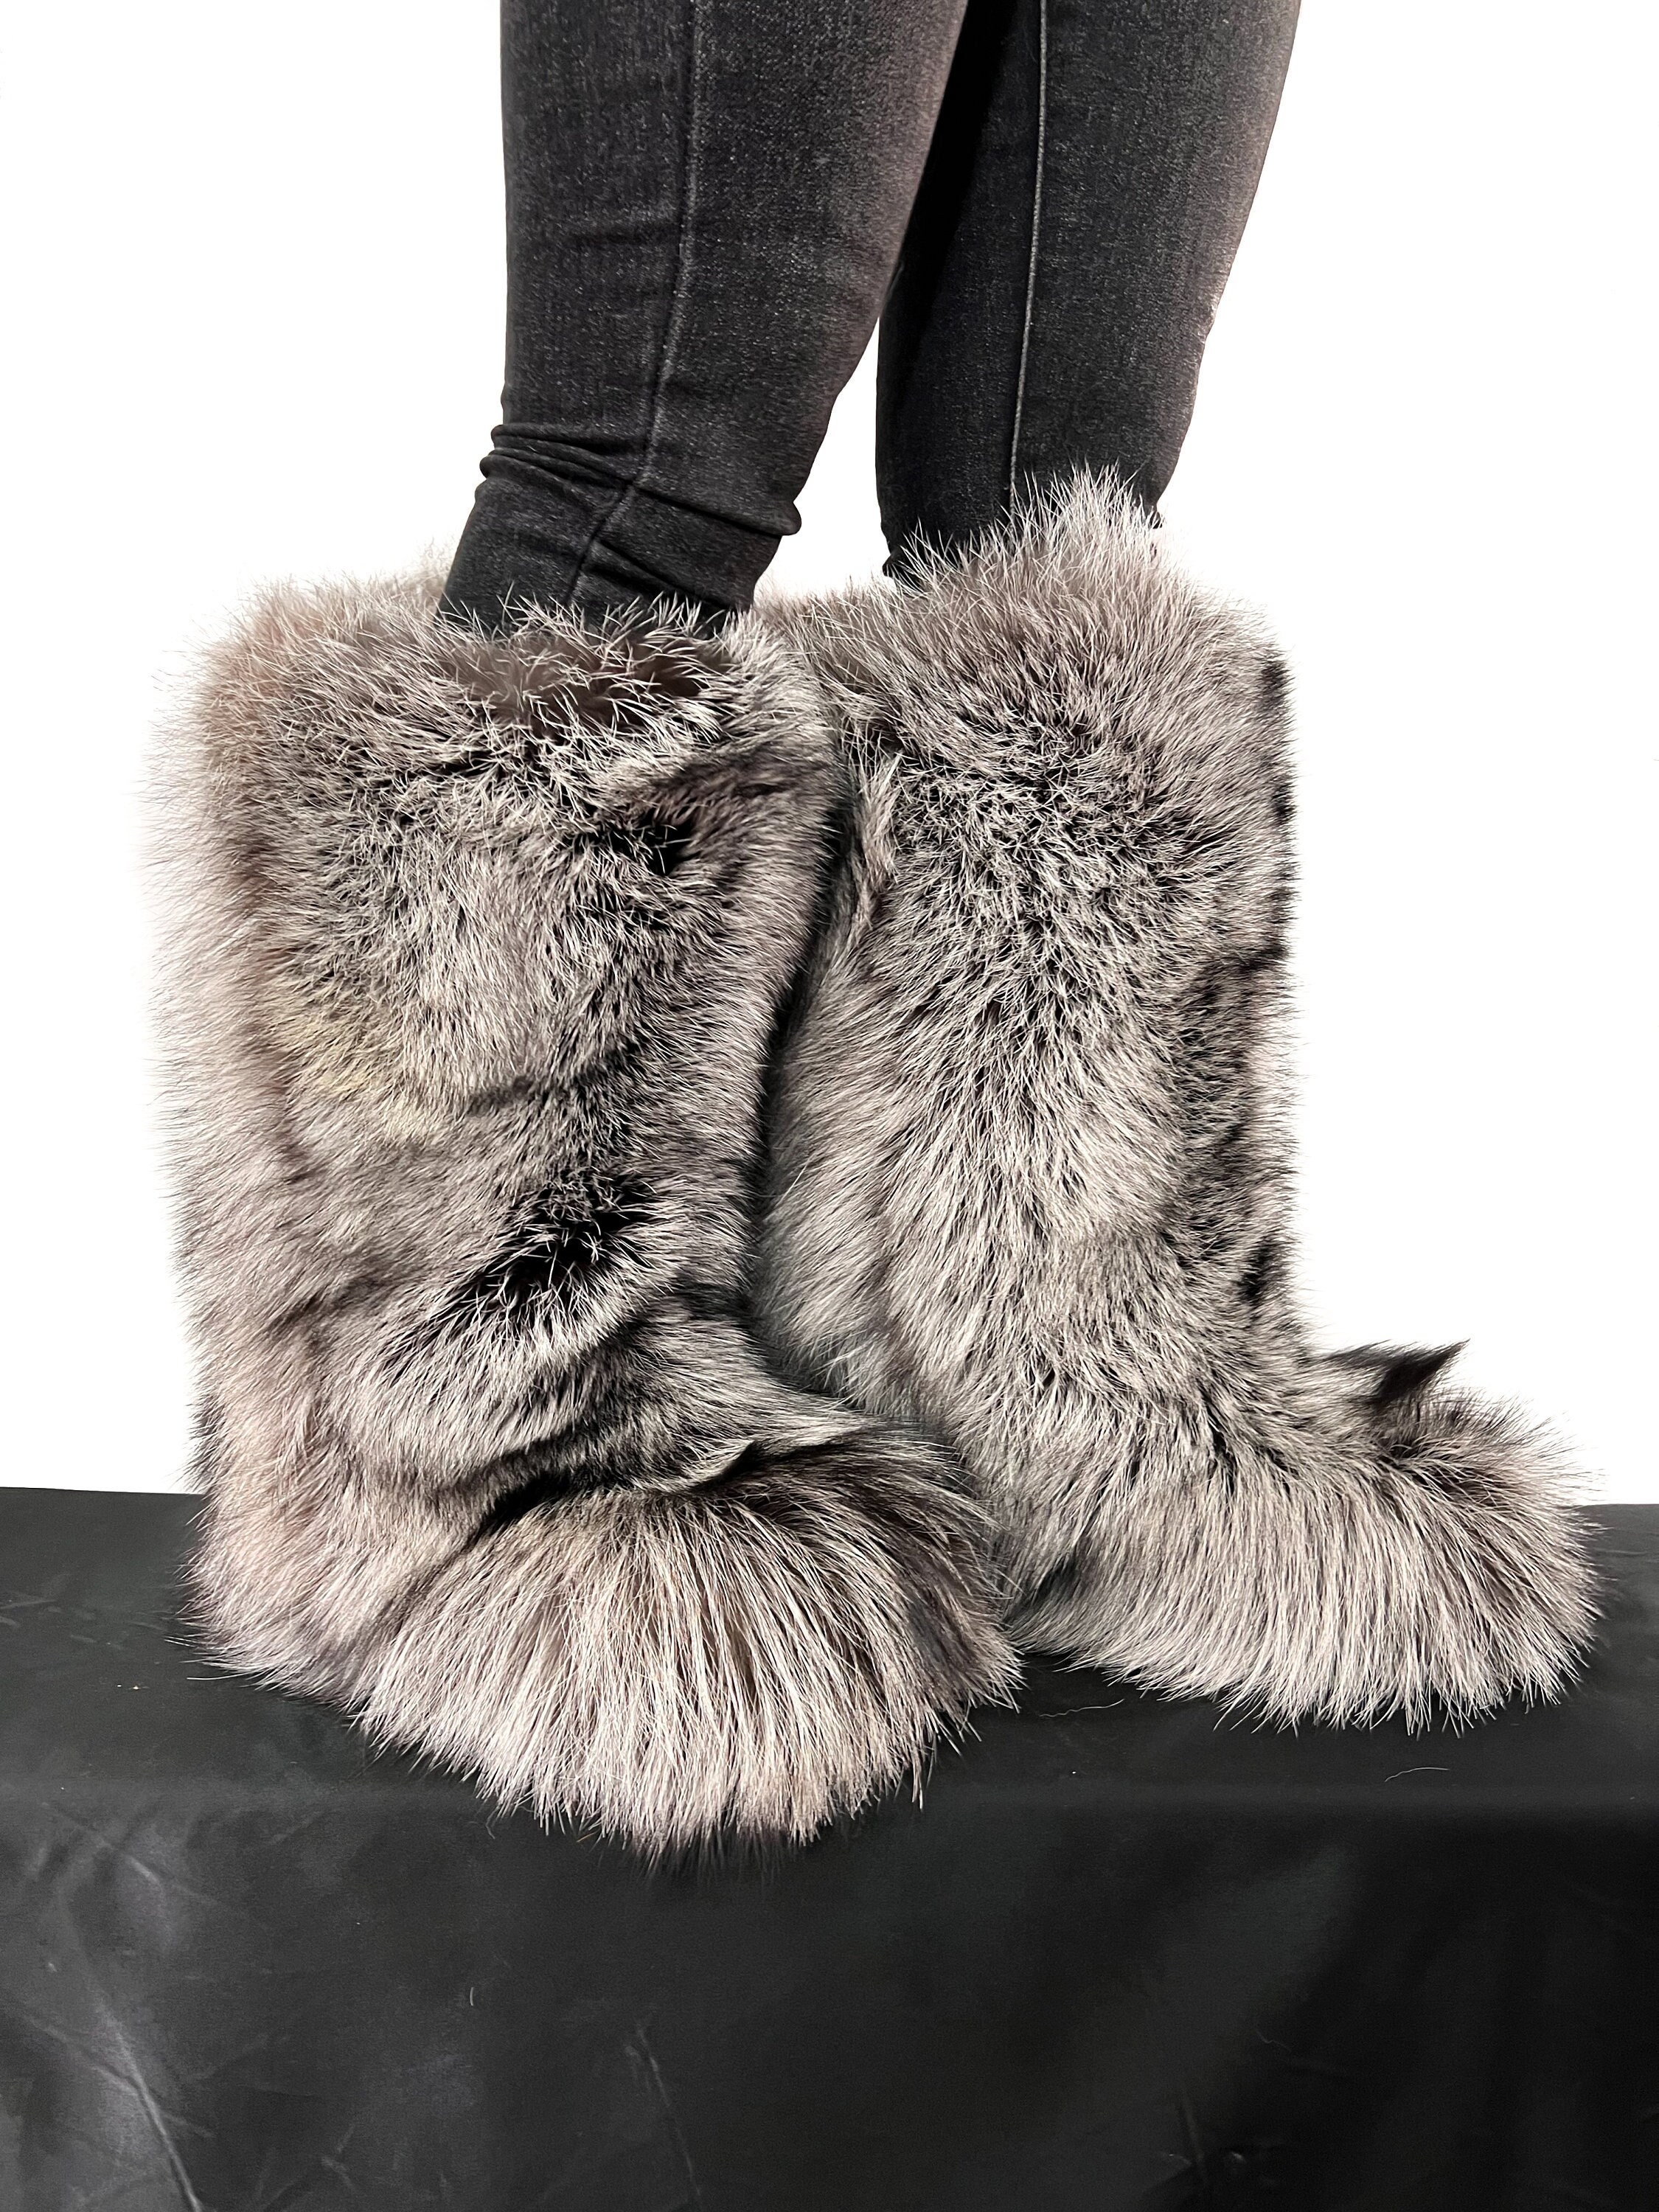 Double-sided Silver Fox Fur Boots for Outdoor Knee High Natural Colors Fur  Inside & Outside Saga Furs Shoes - Etsy